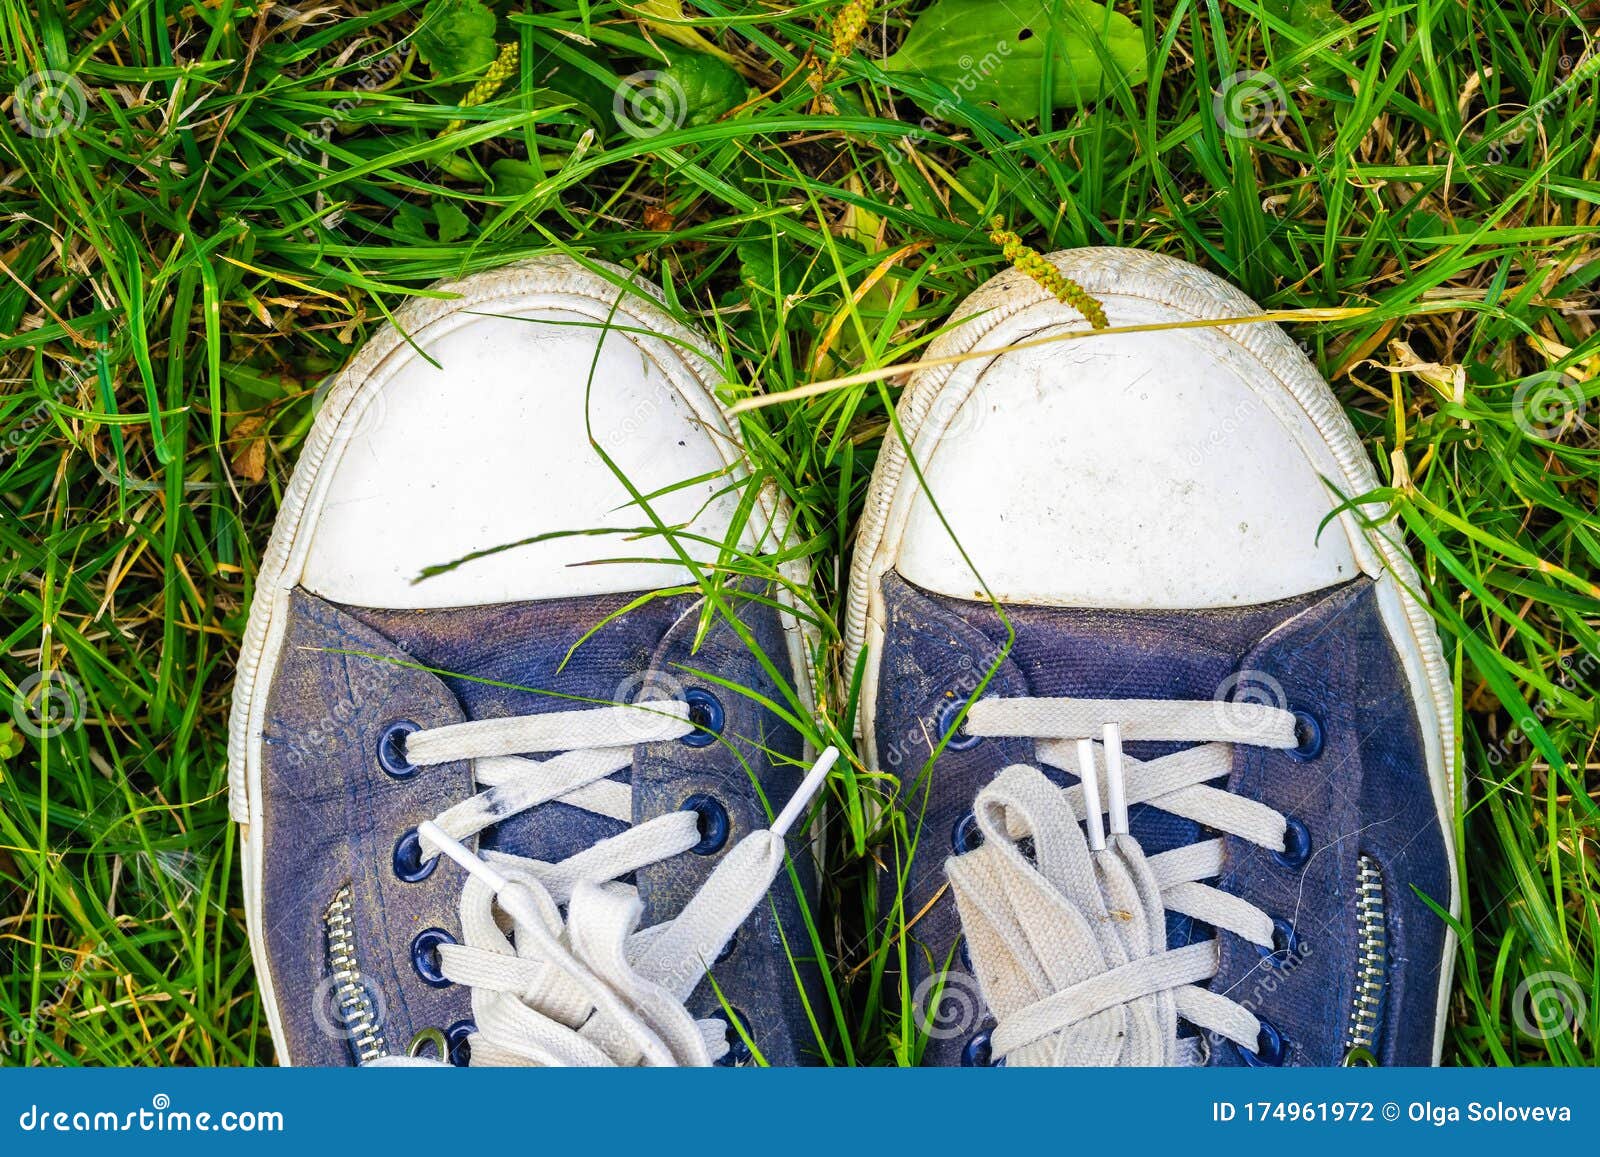 Old, Dirty, Shabby Sneakers on the Green Grass. Hiking Travel Concept ...